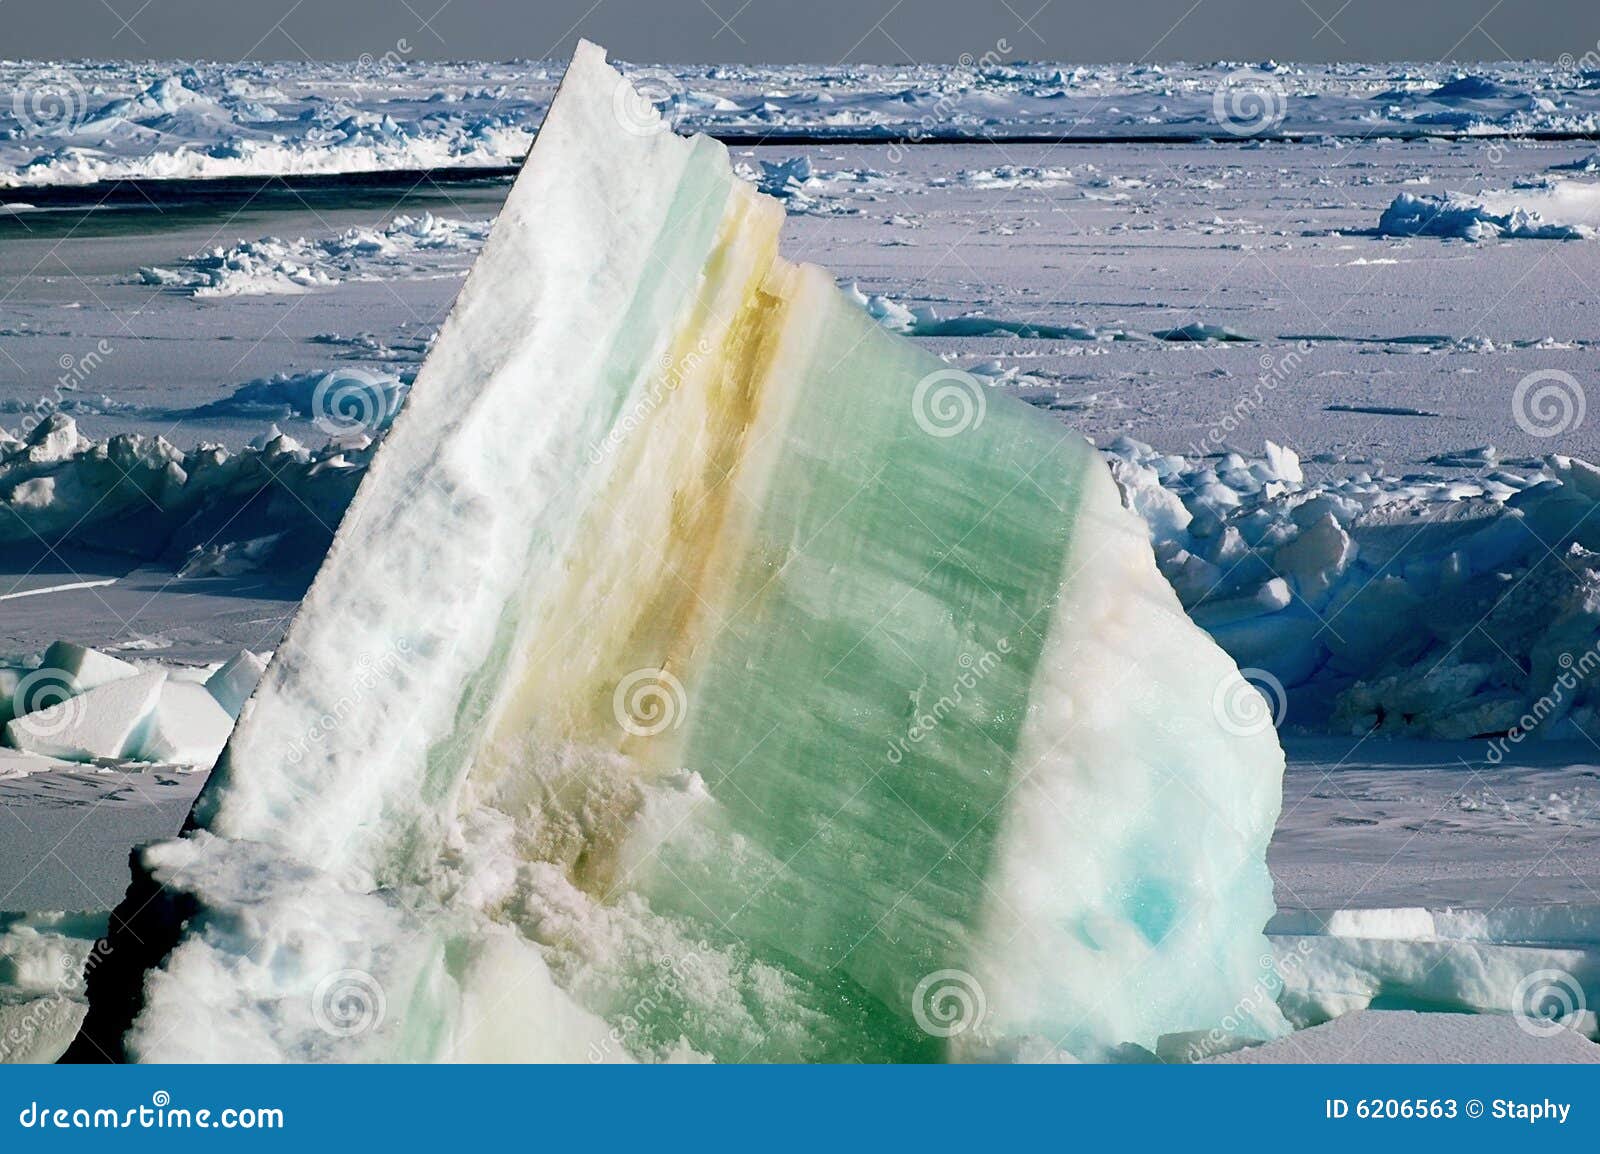 ice floe with layers